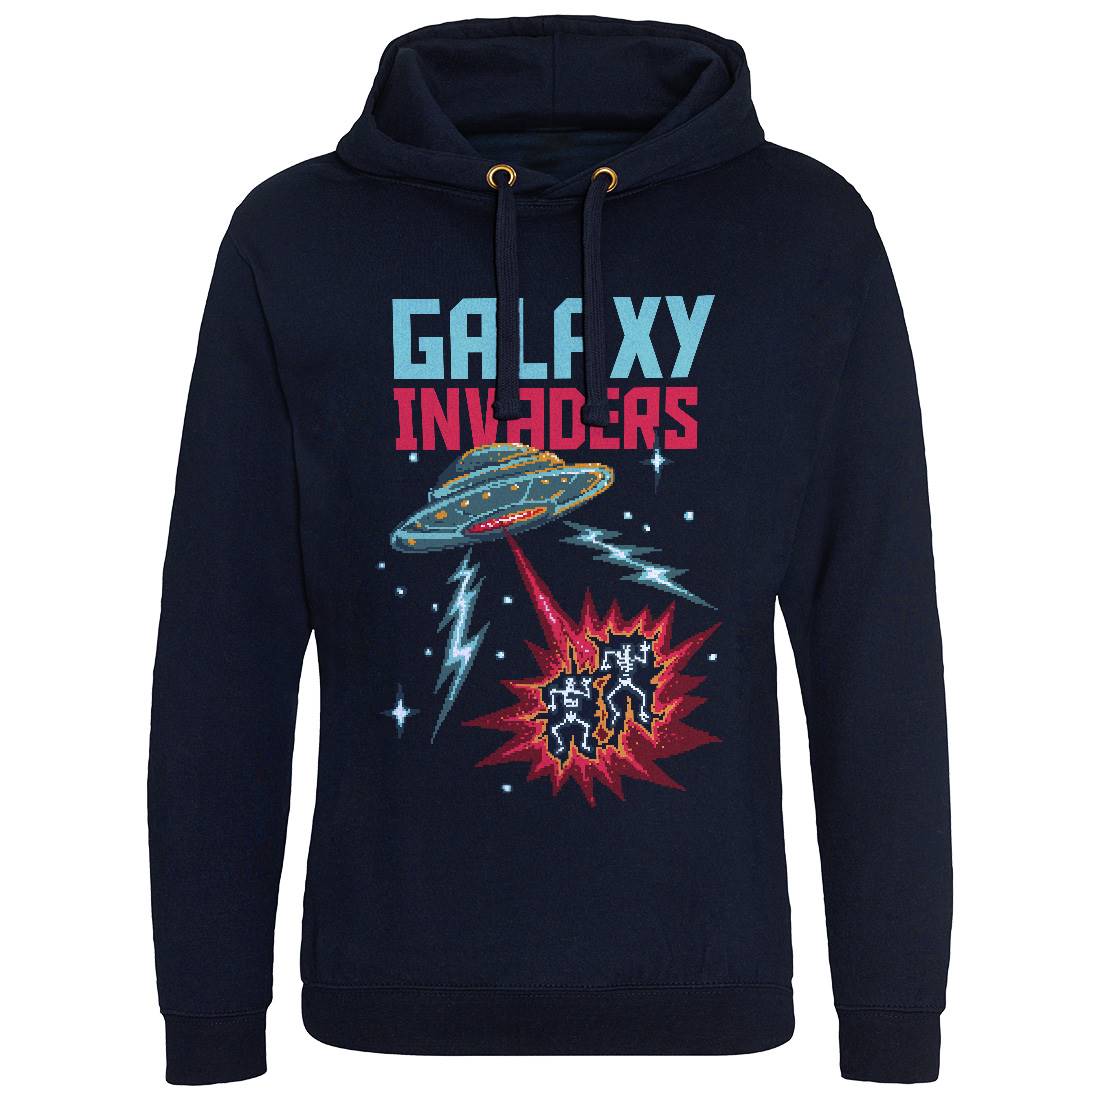 Invaders Mens Hoodie Without Pocket Space B900